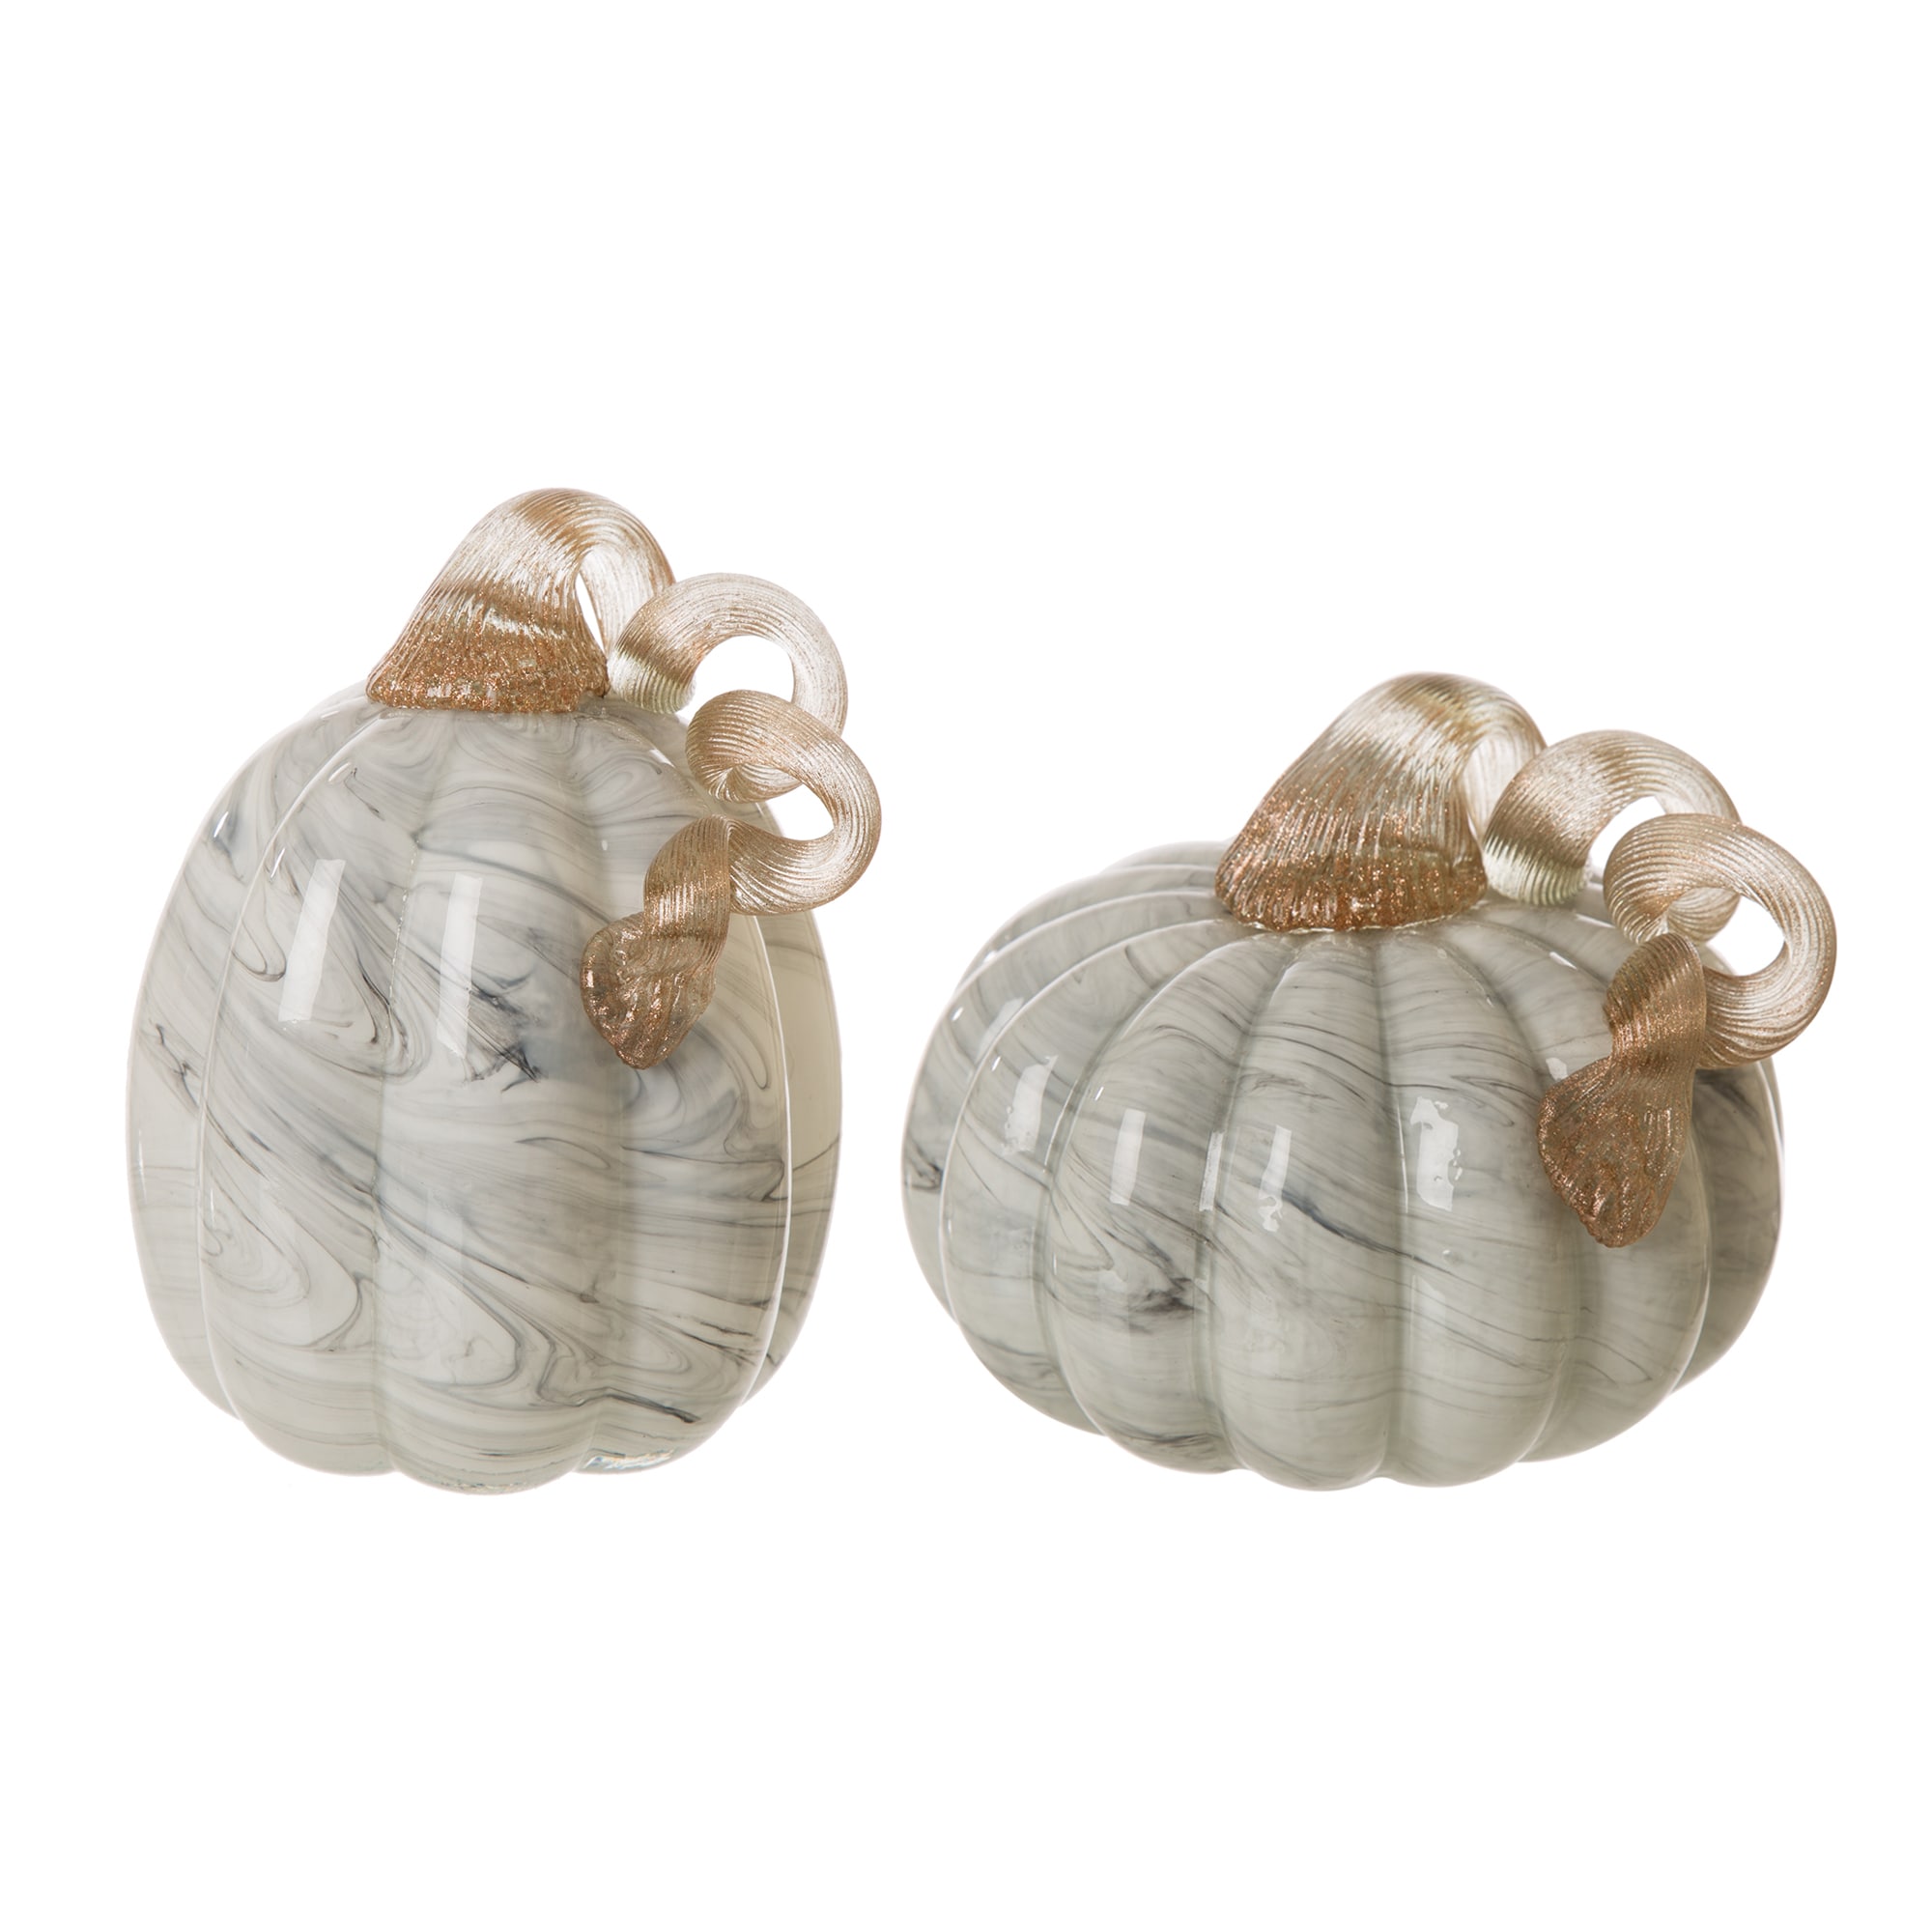 Glitzhome Pumpkin Tabletop Decoration (2-Pack) in the Fall Decor ...